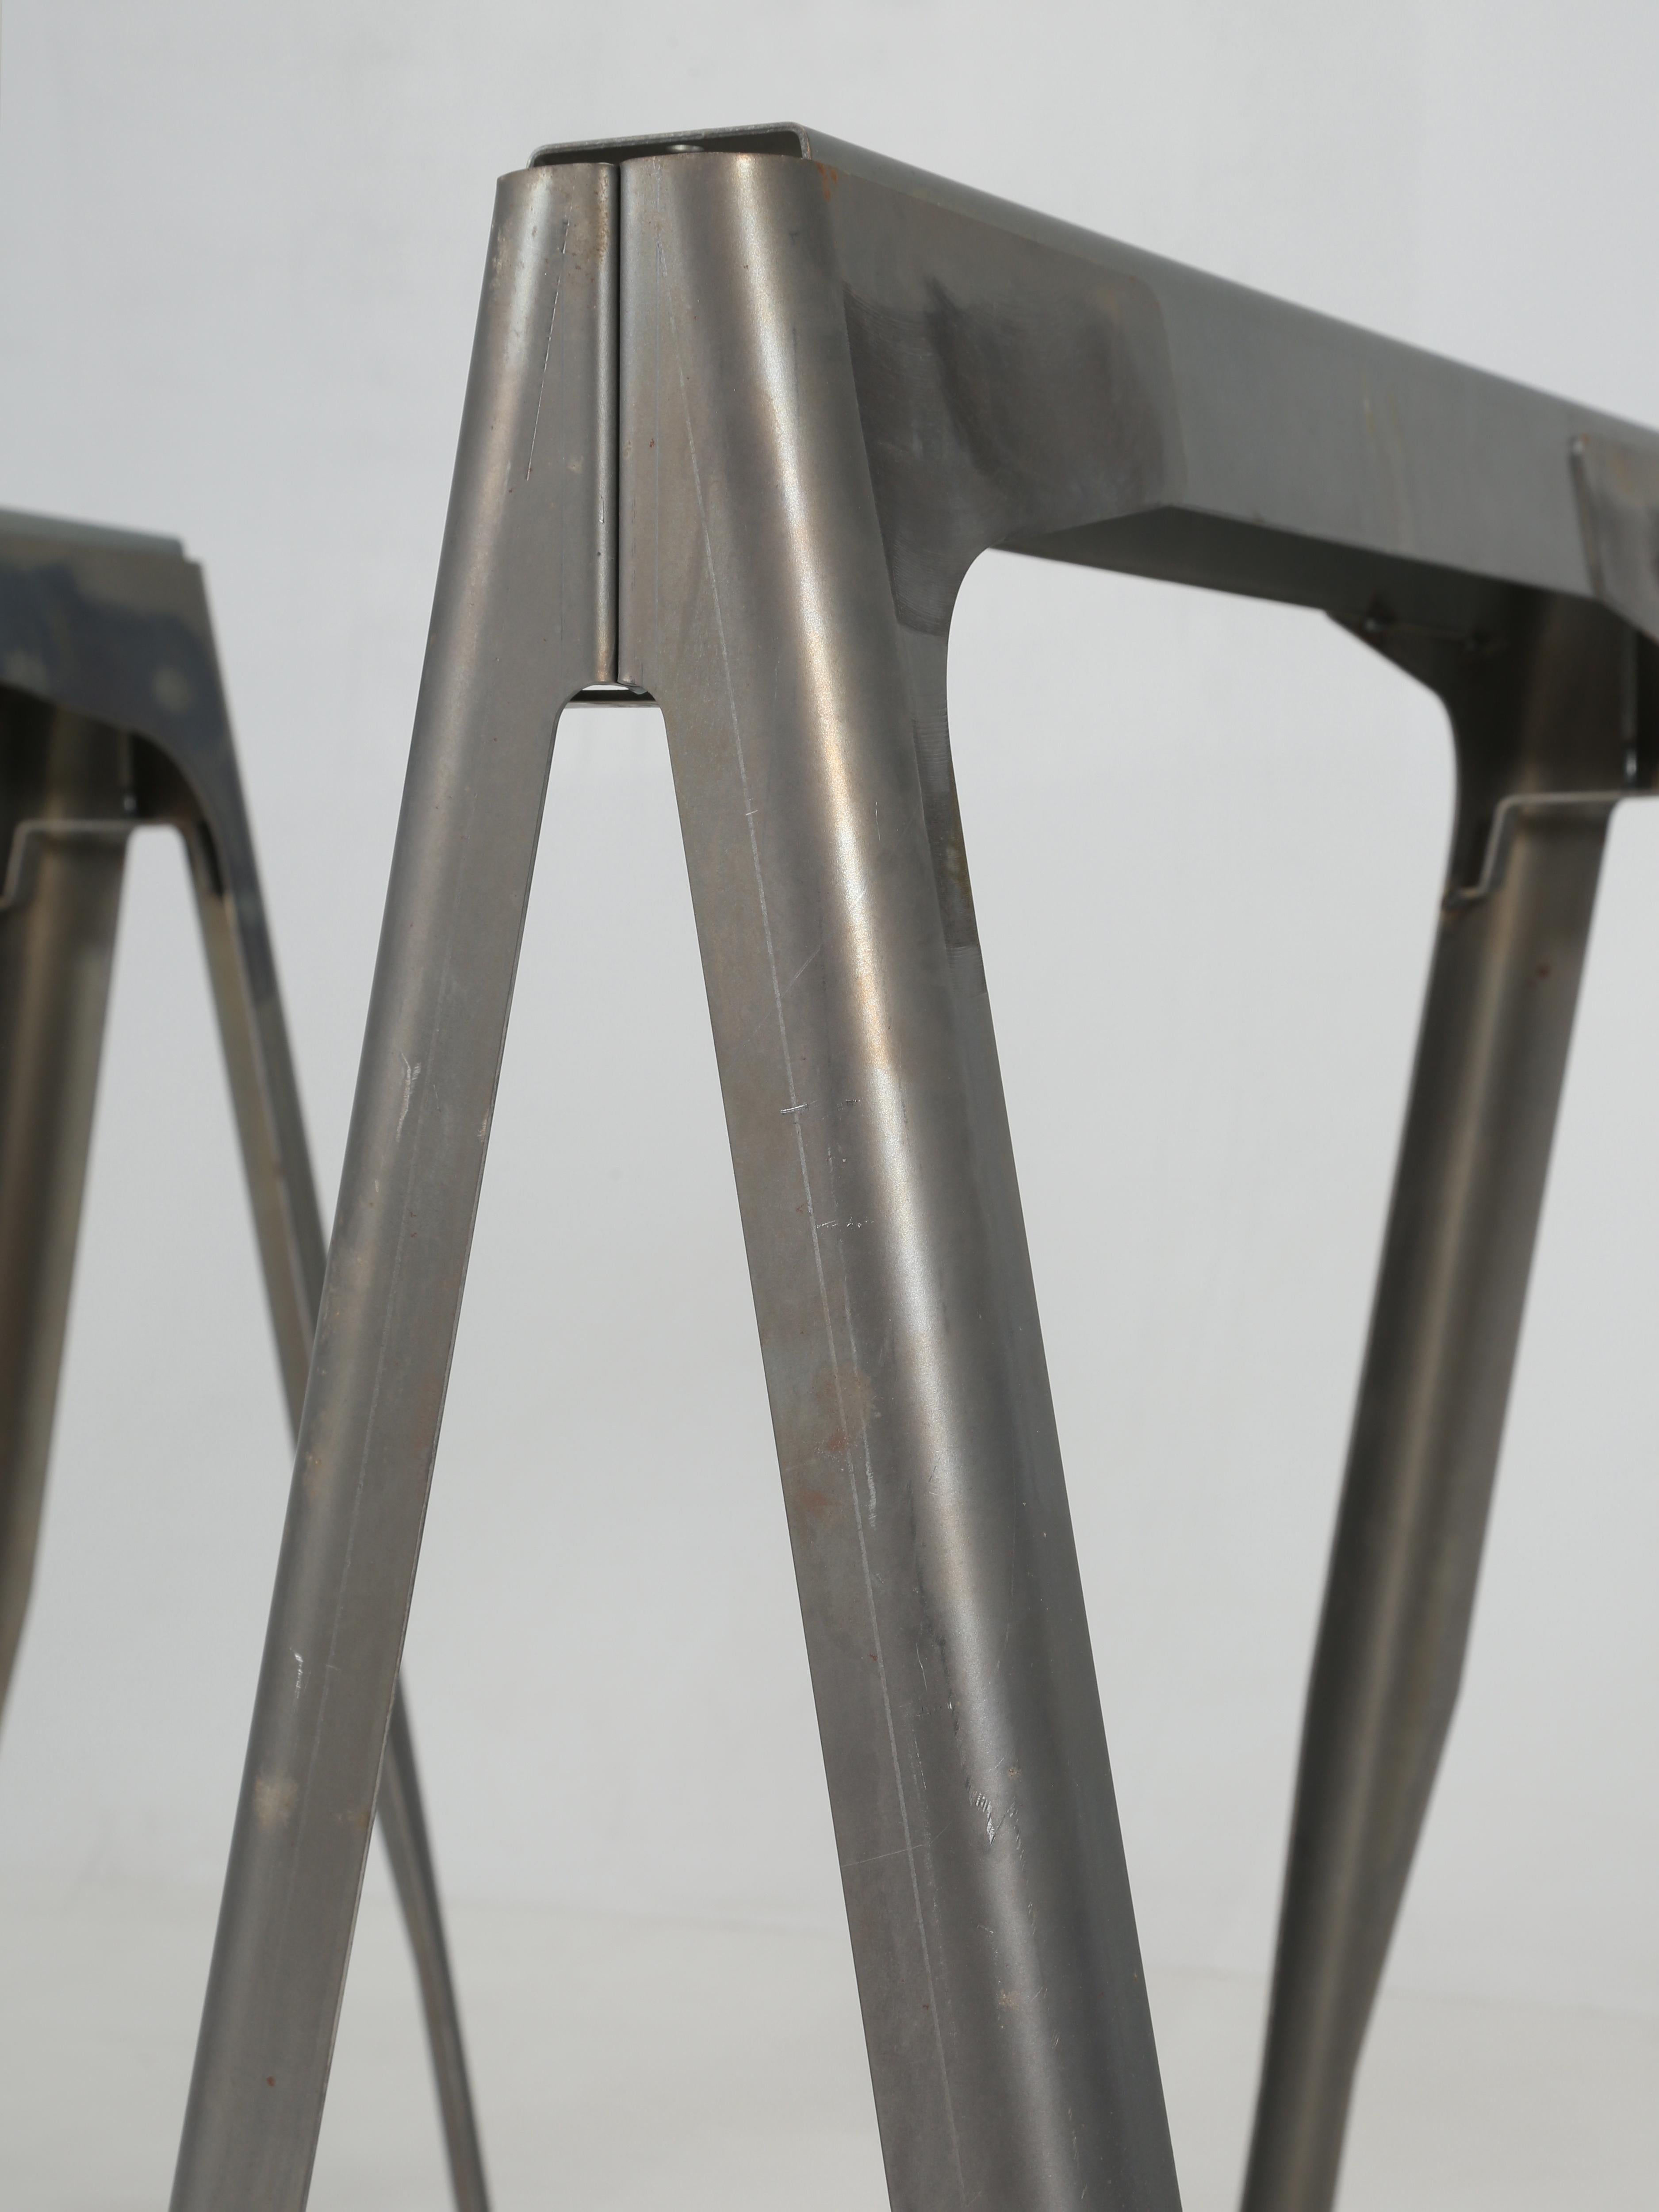 Contemporary Genuine French Made Tolix Steel Trestle Table Legs, Table Top Not Included, New For Sale